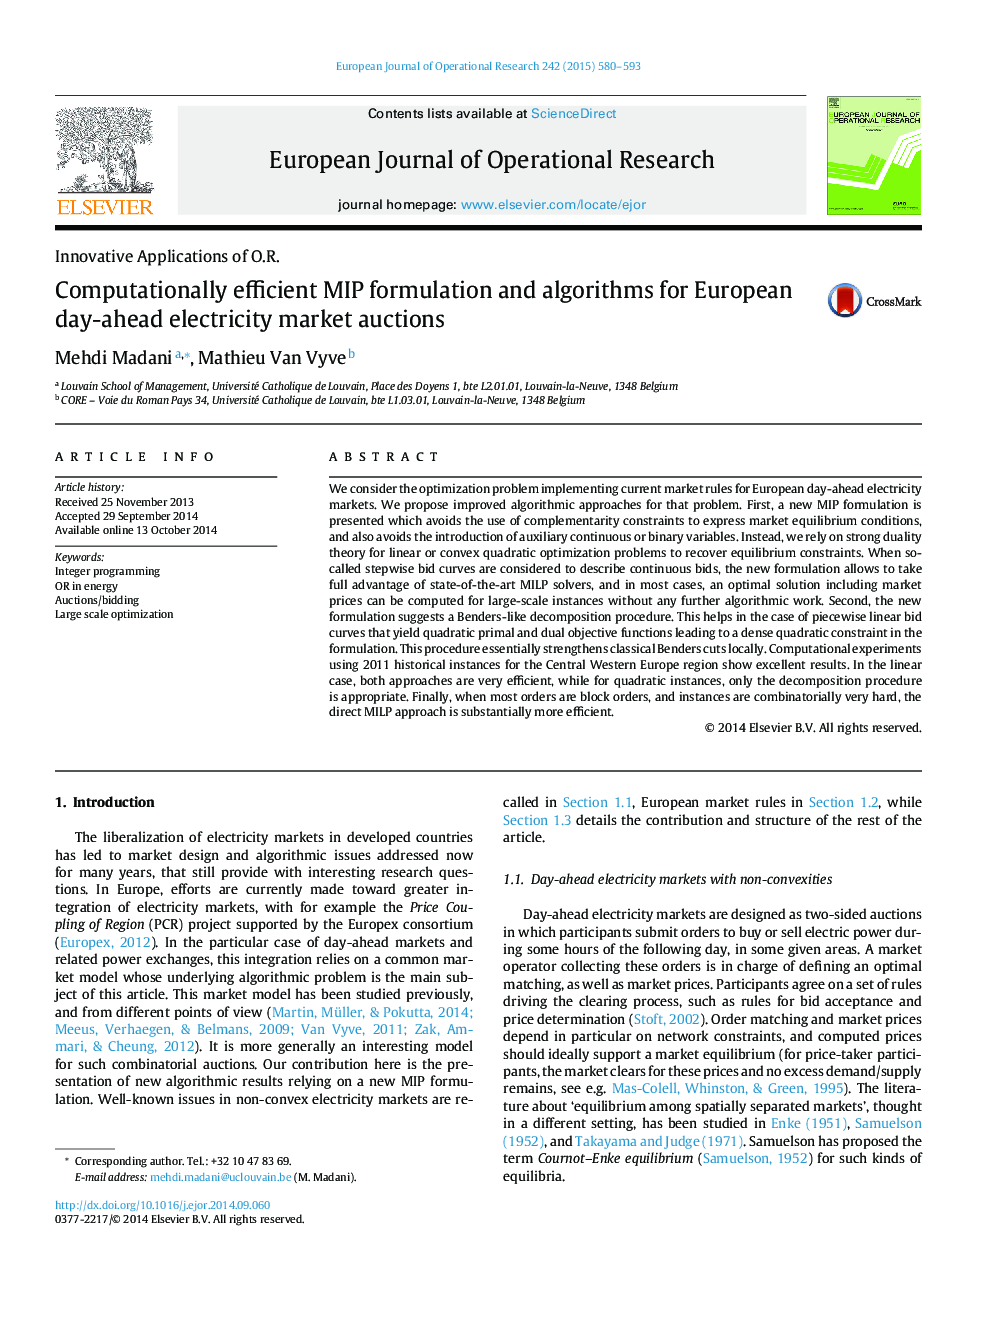 Computationally efficient MIP formulation and algorithms for European day-ahead electricity market auctions